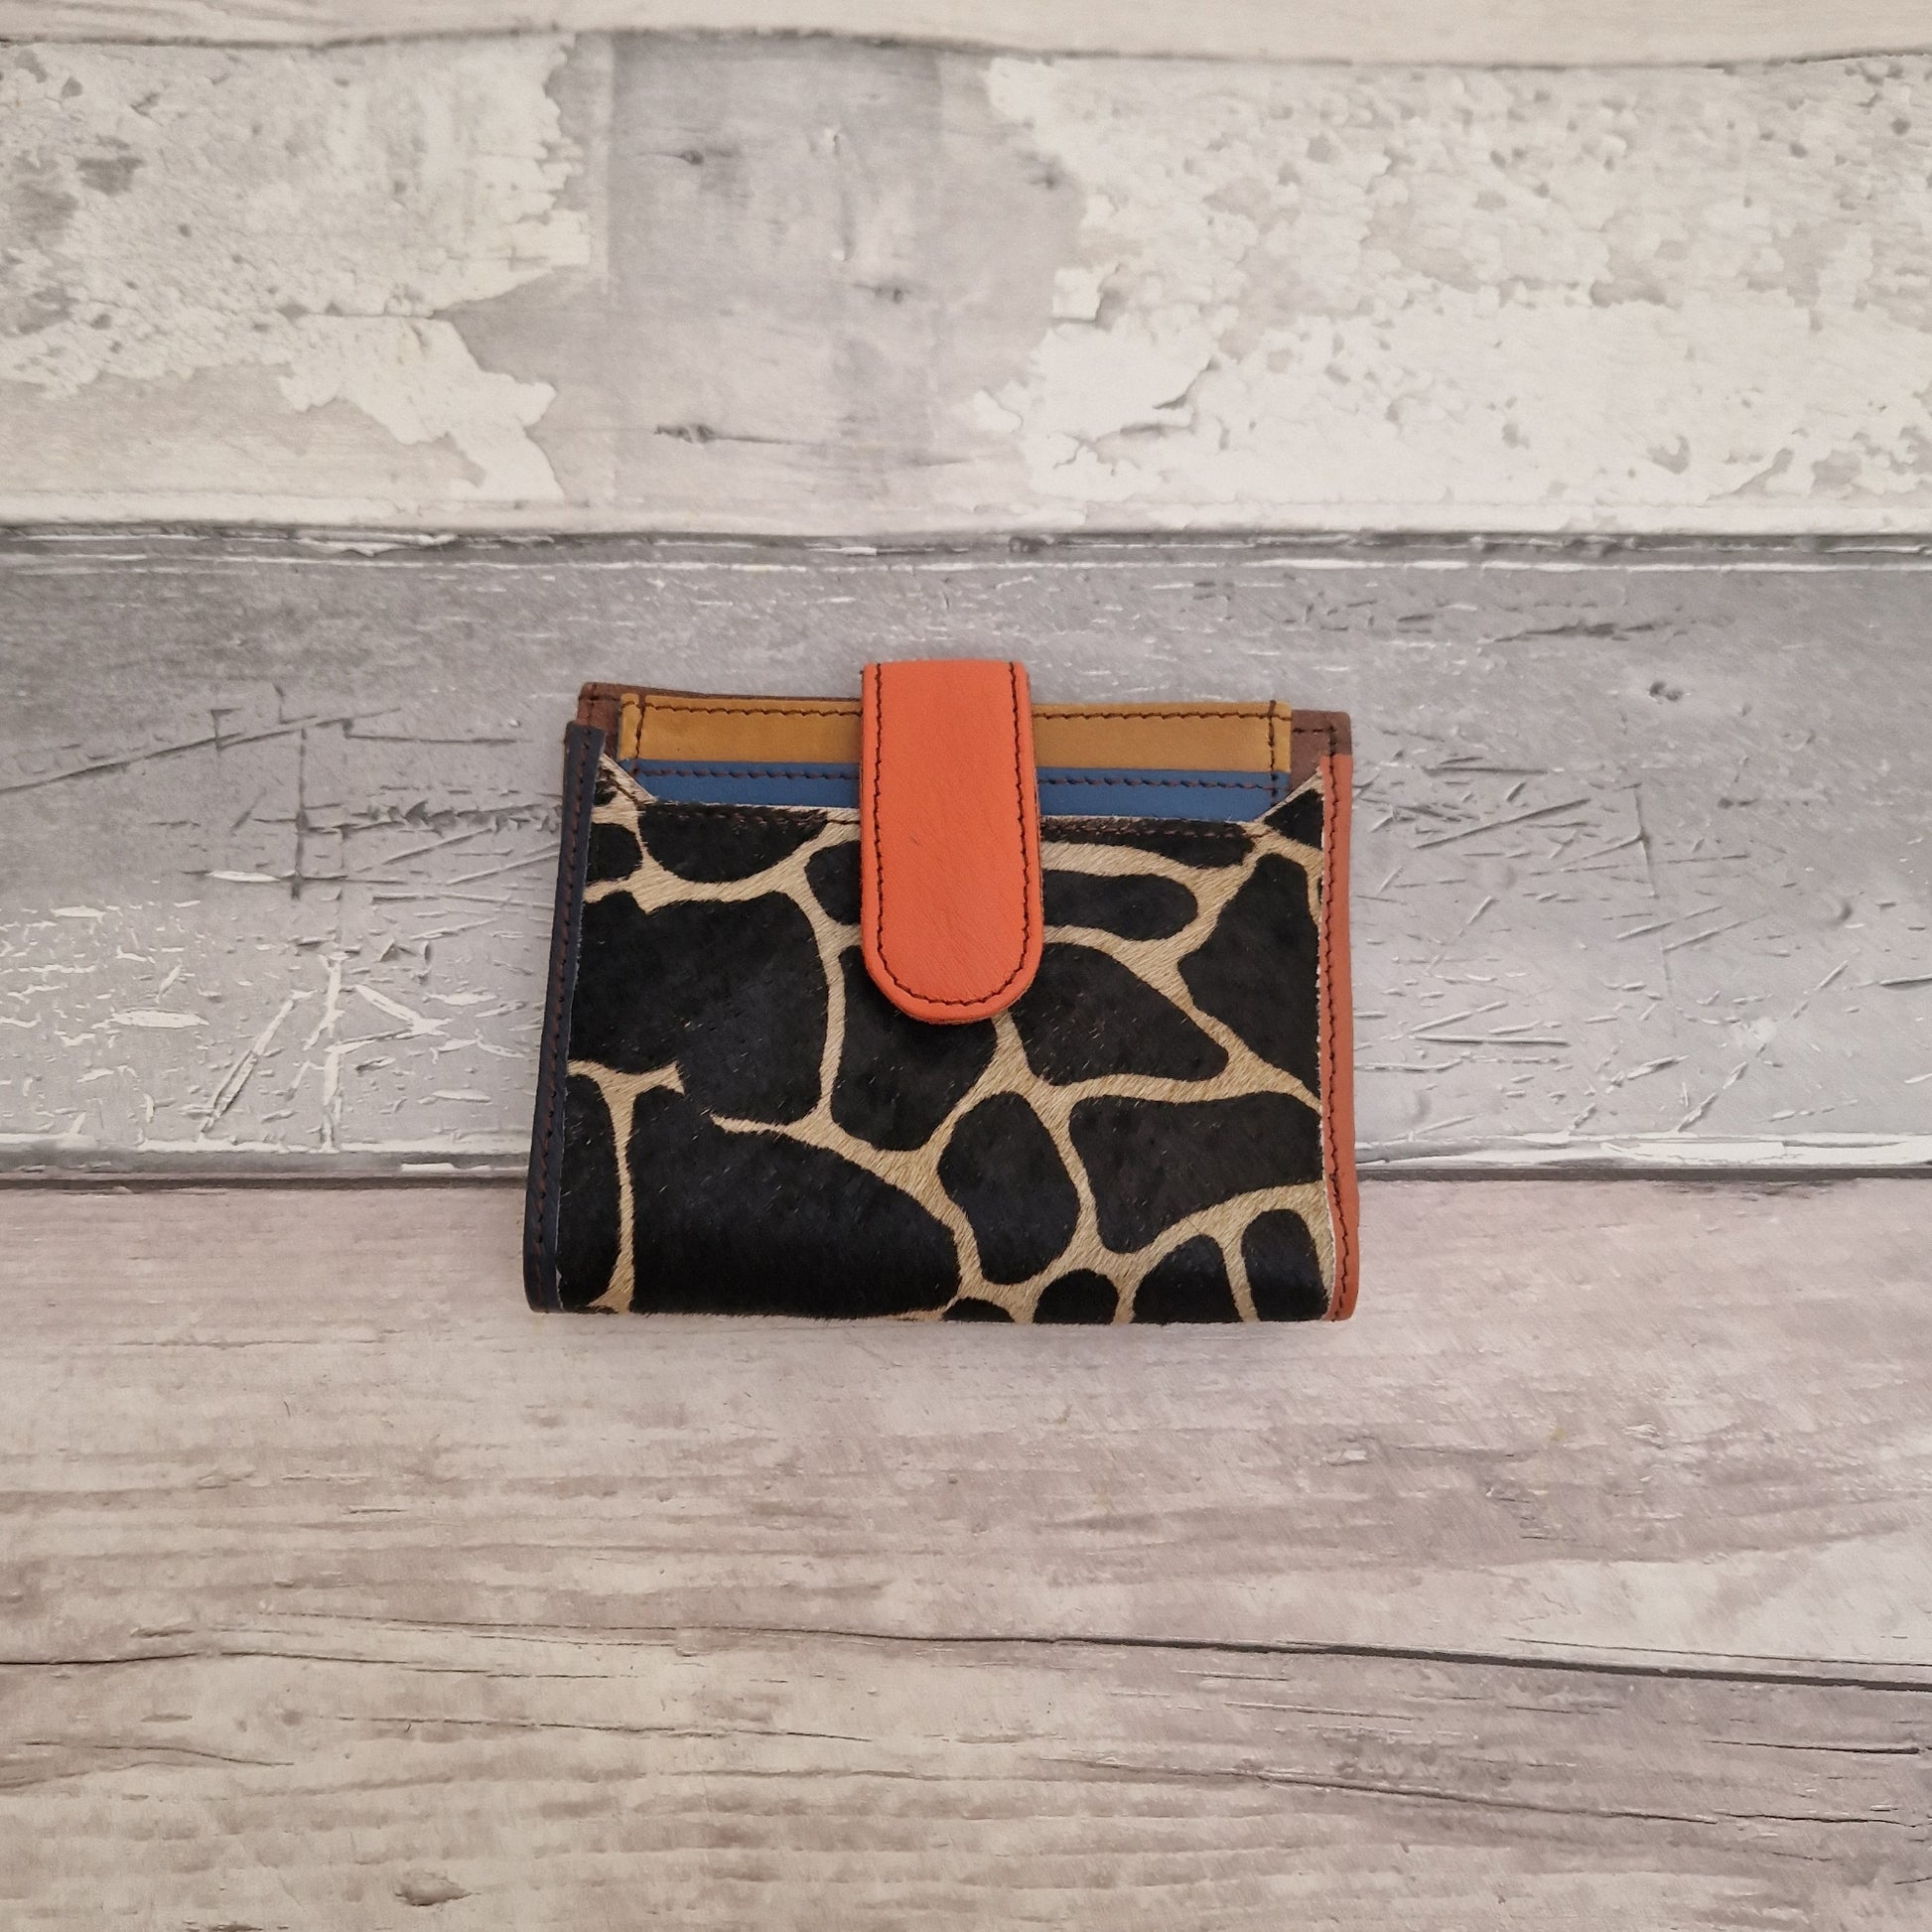 Leather ladies wallet with a textured front panel in giraffe print.